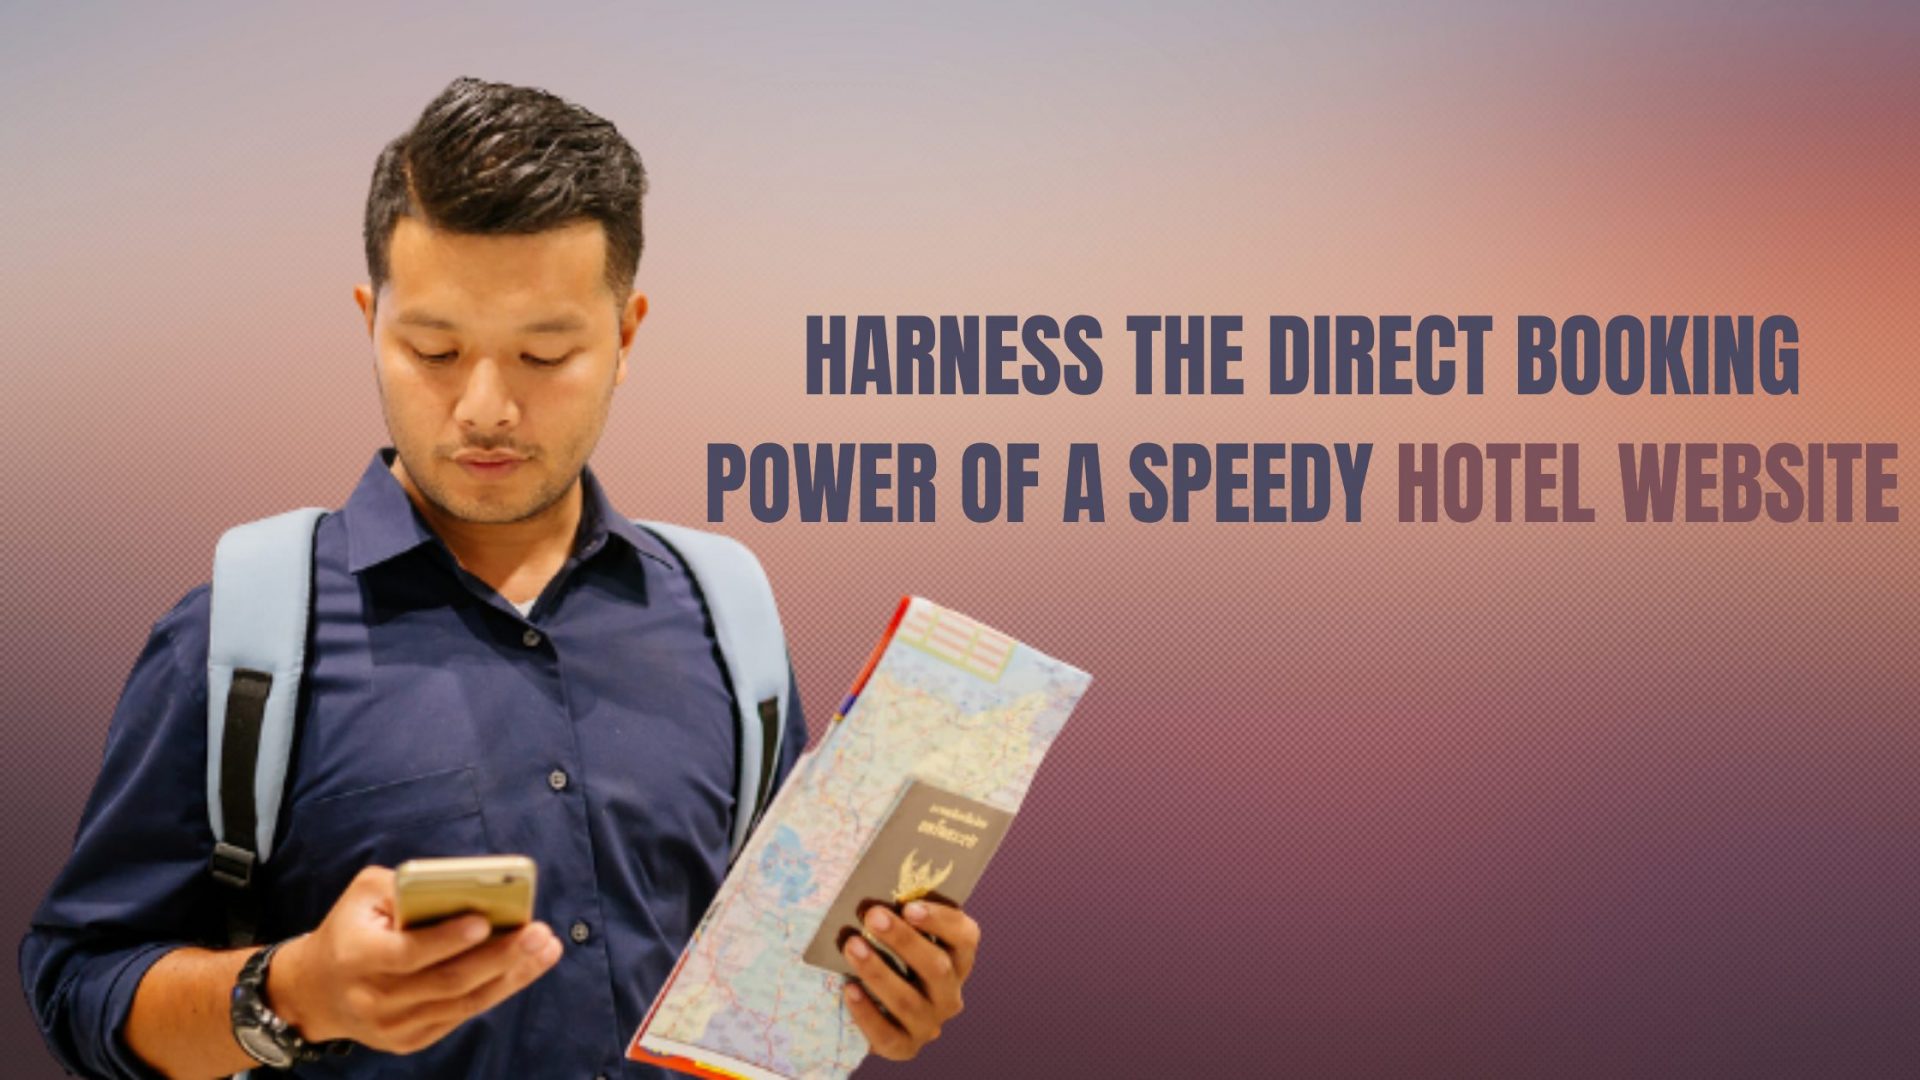 Harness The Direct Booking Power of A Speedy Hotel Website